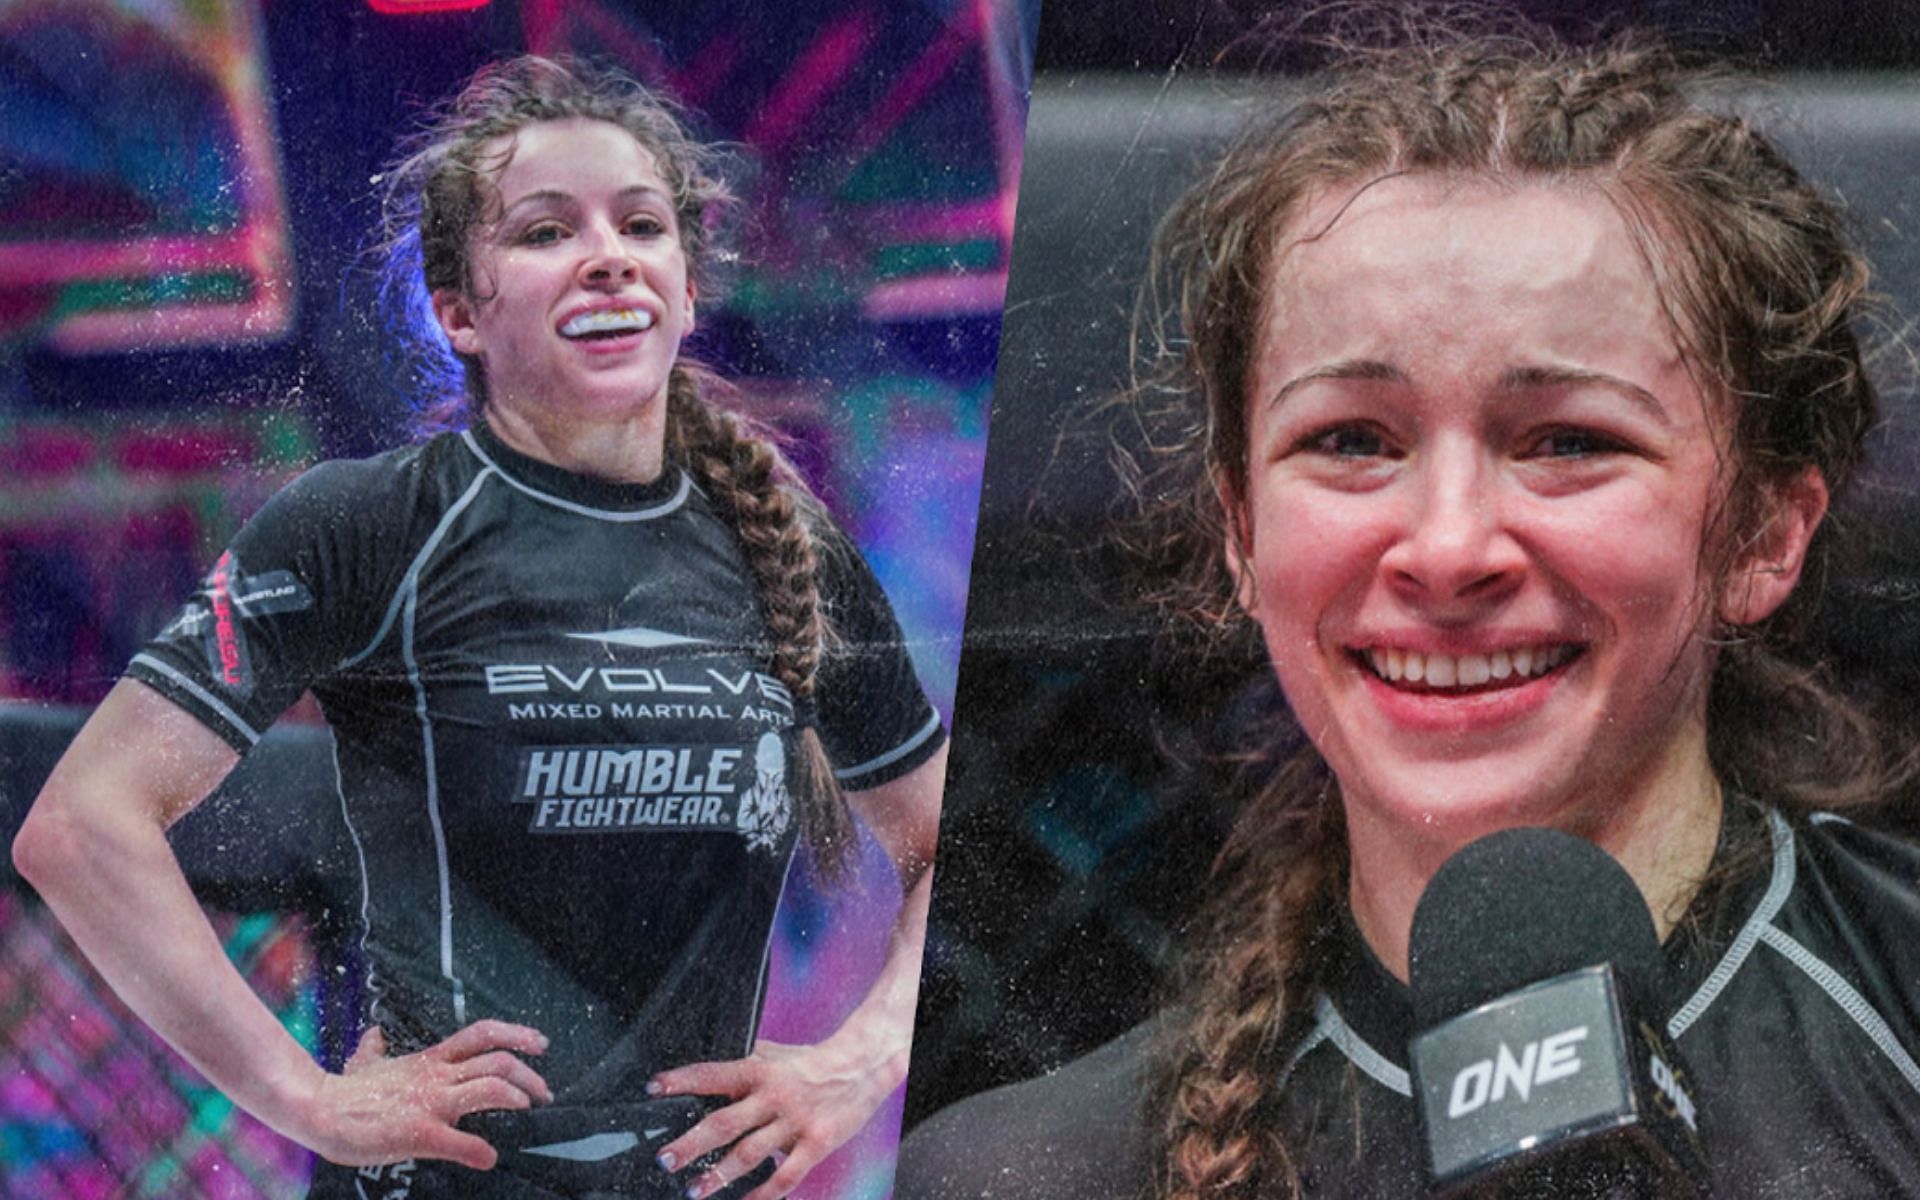 ONE atomweight grappling sensation, Danielle Kelly [Credit: ONE Championship]